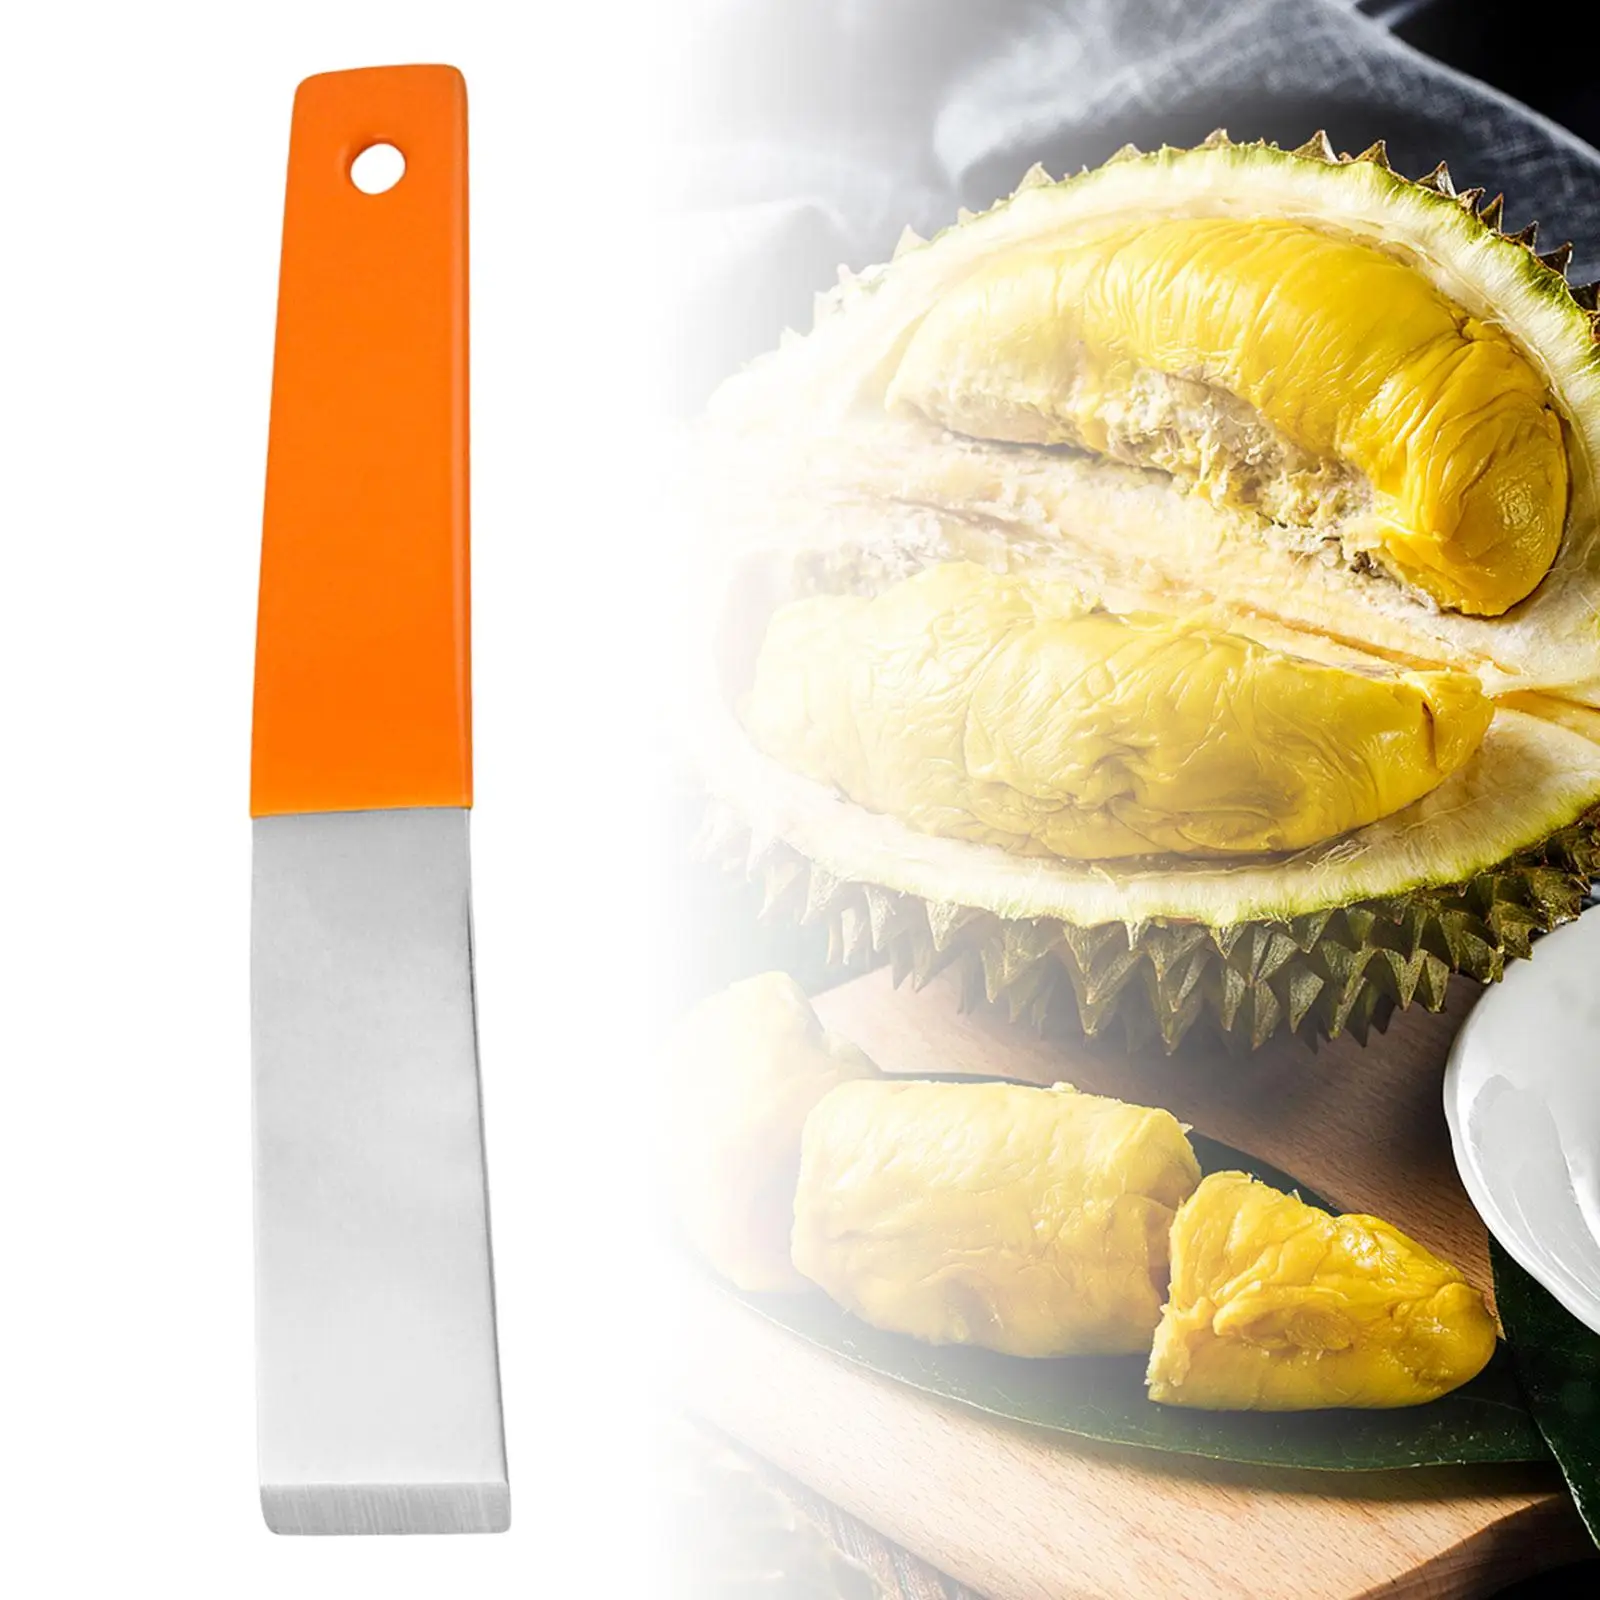 Fruit Durian Shell Opener Durable Peeling Smooth Stainless Steel Durian Opener for Camping Household Fruits Shop Gadget Utensils